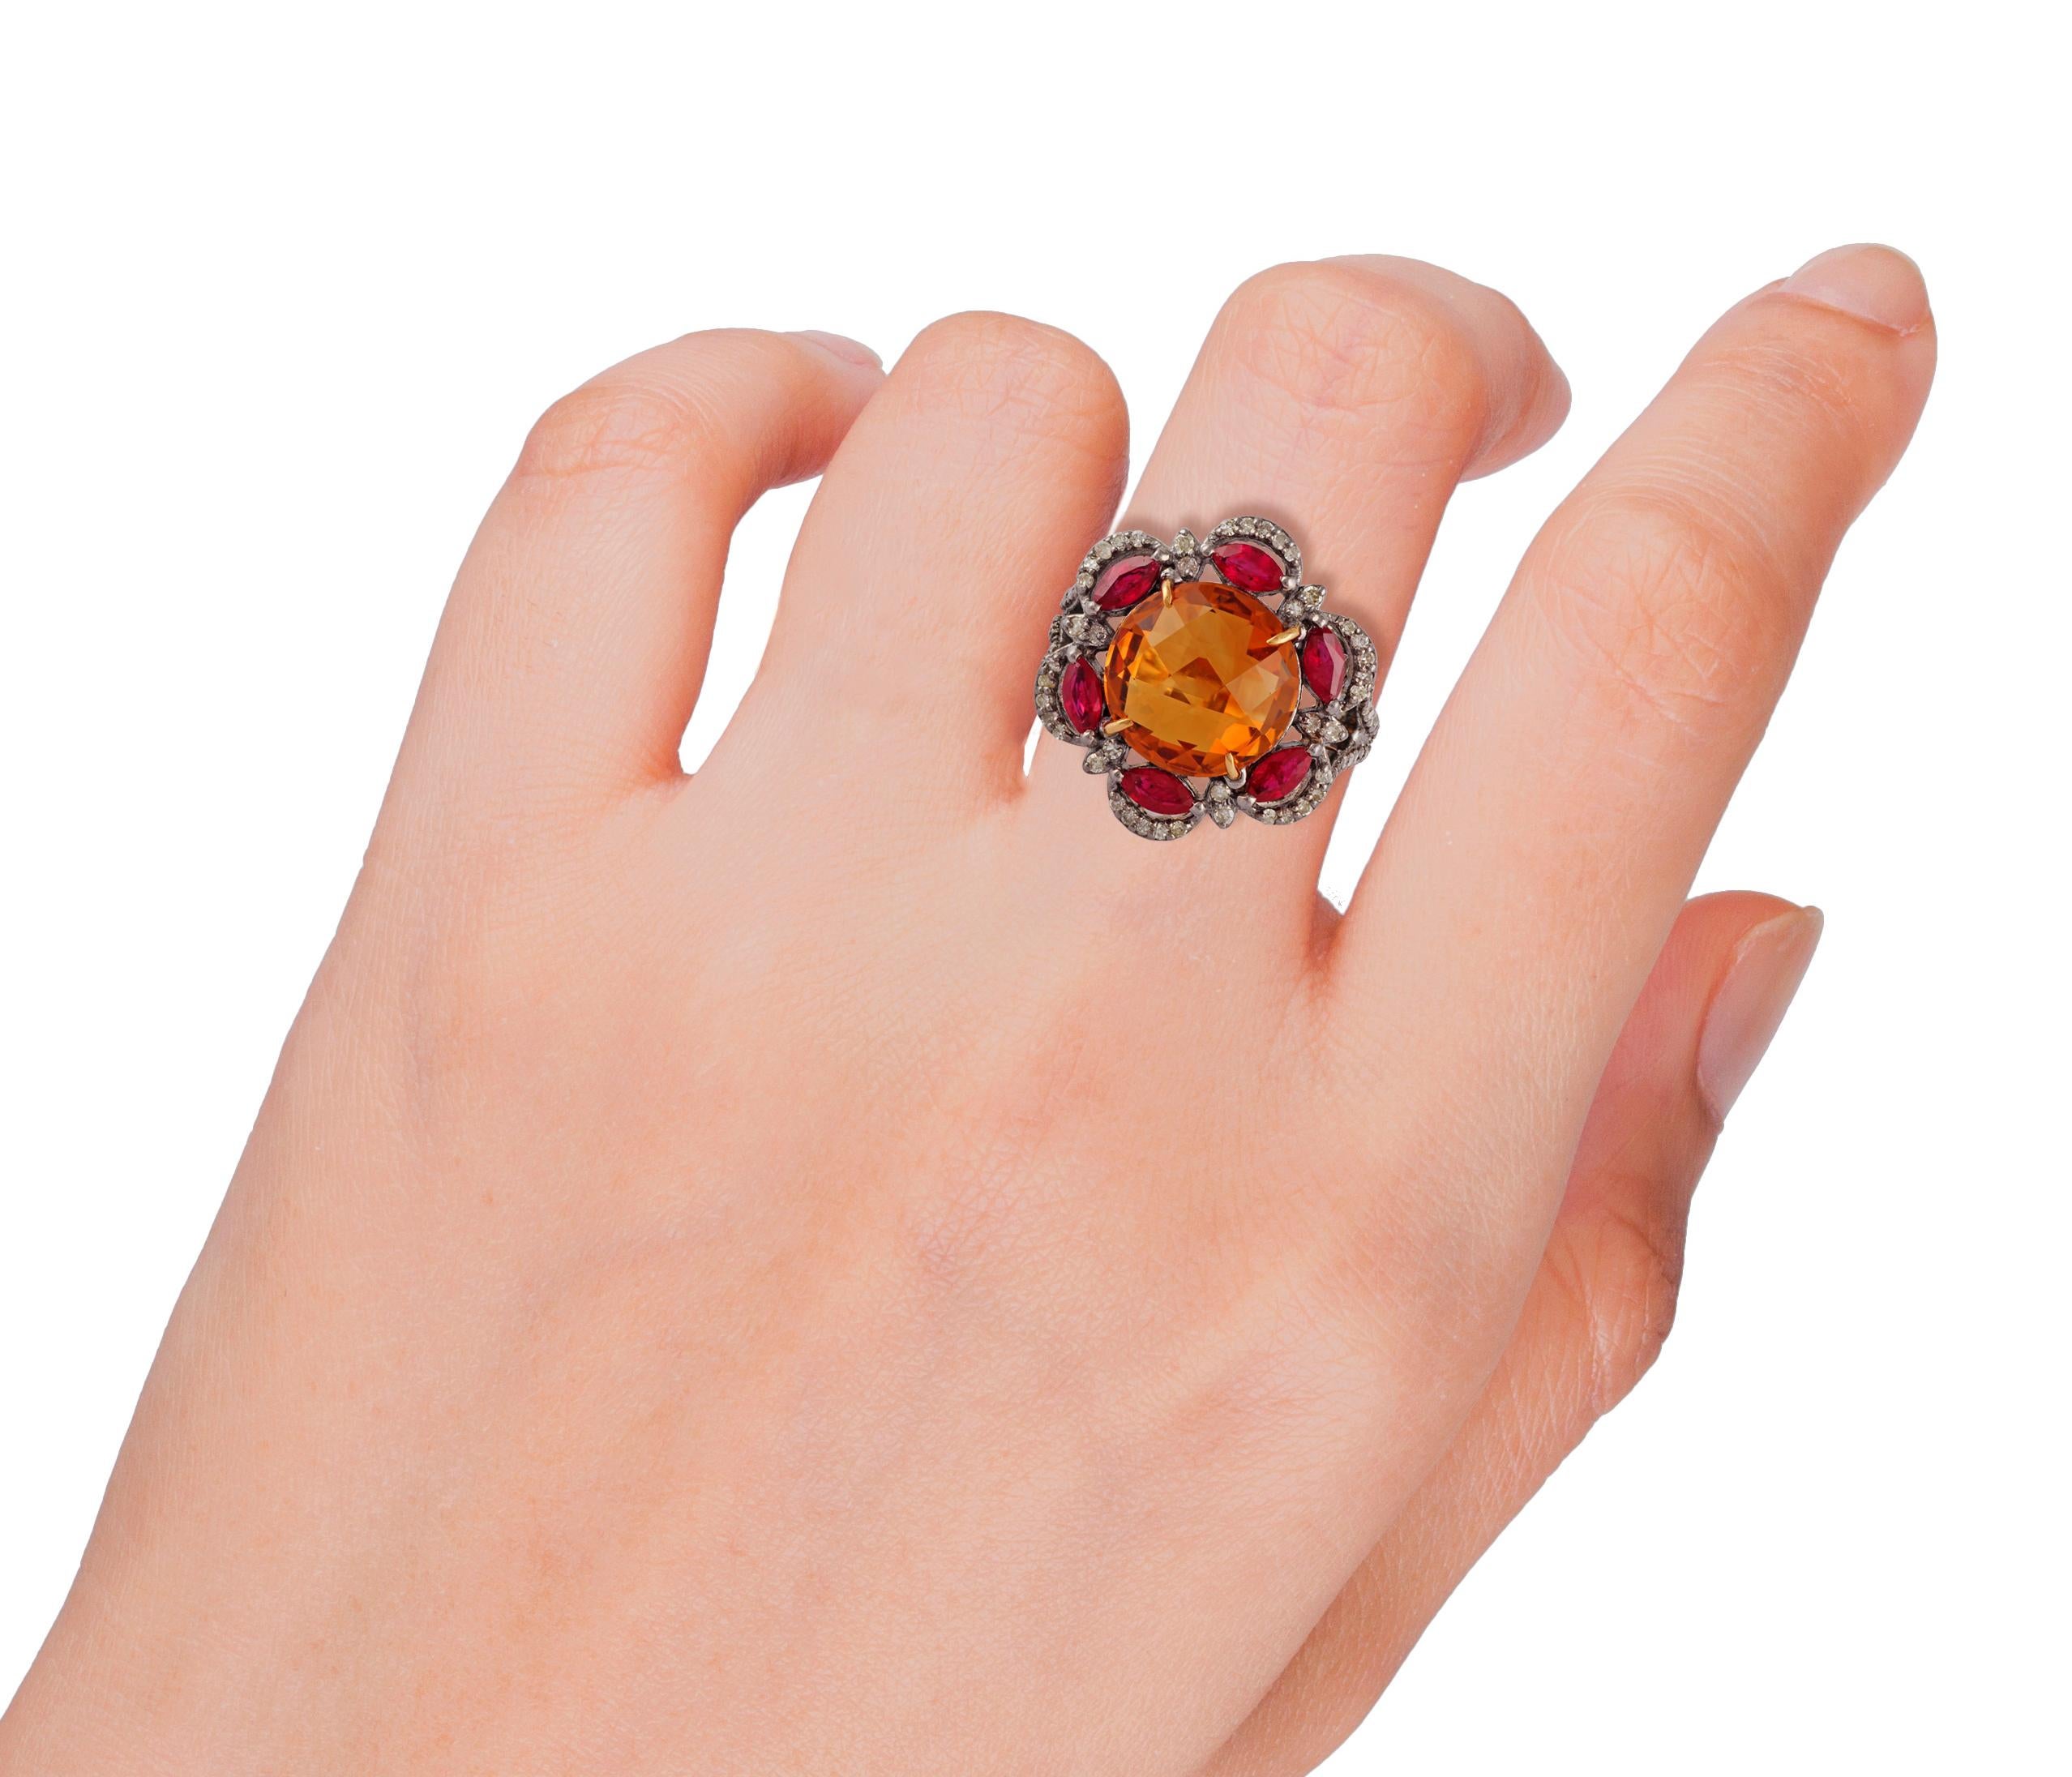 Antique Victorian 5.51 Carat Citrine, Ruby & Diamond Cocktail Ring Gold Silver In New Condition For Sale In Jaipur, Rajasthan